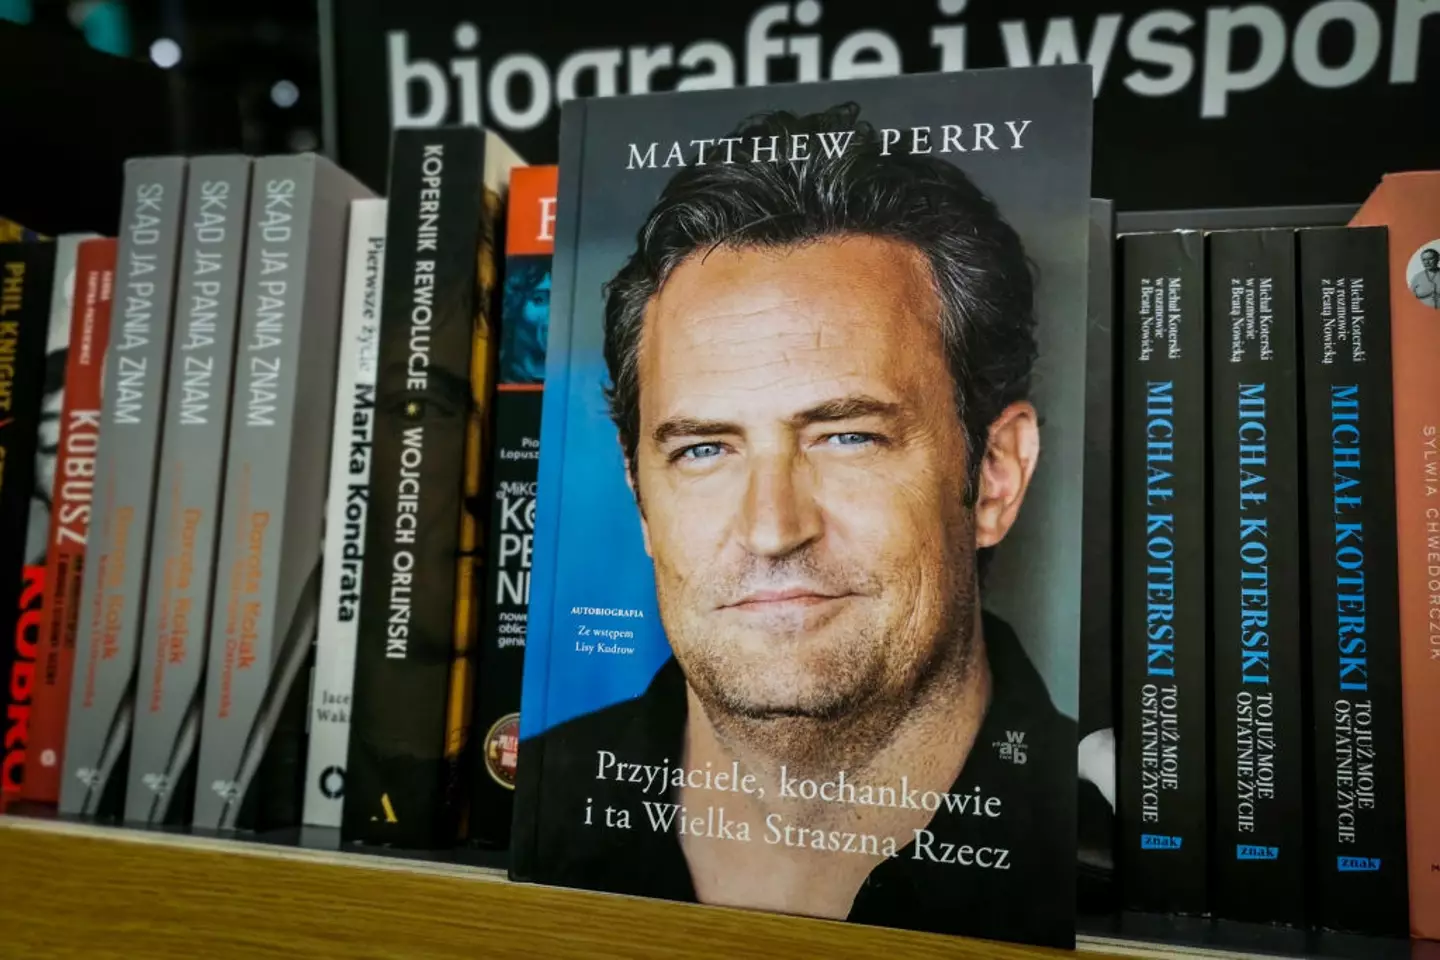 Matthew Perry signed his books with the message 'don't give up'.